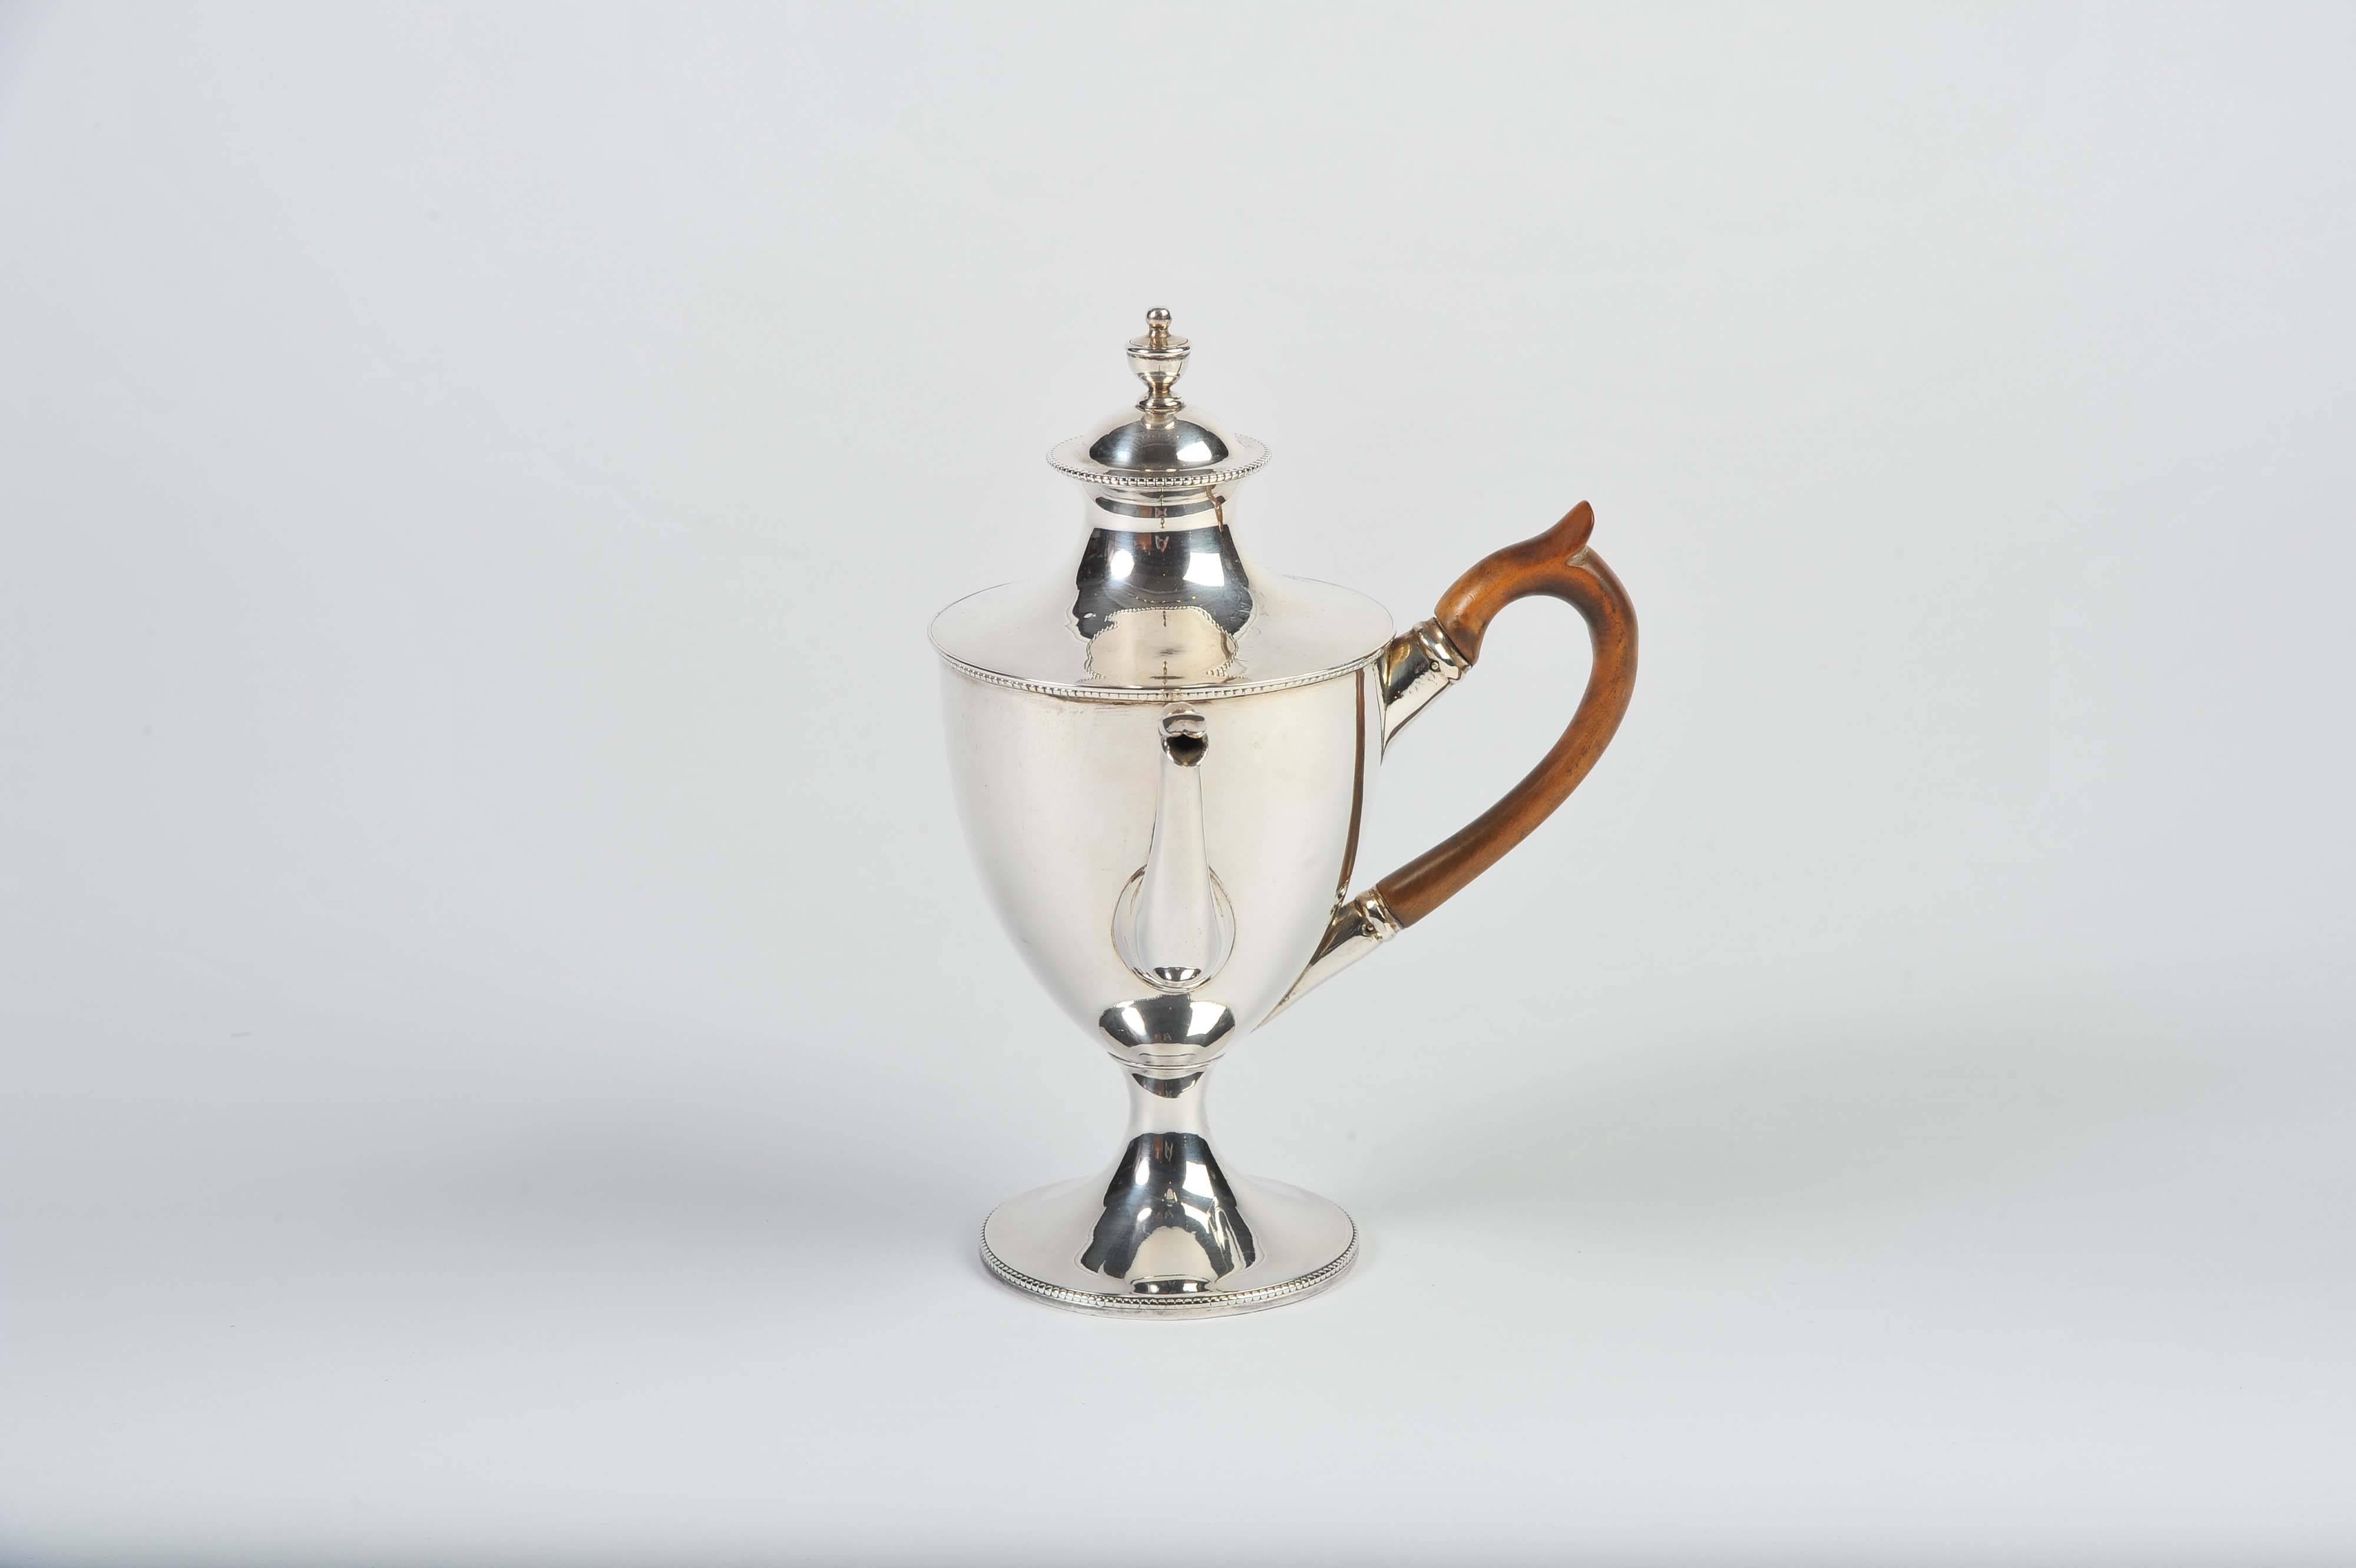 A fine late 18th century Sheffield plate 'Argyle' heater jug for sauce or gravy.
Of wonderful Classic form, it is so named after John IV Duke of Argyle who first commissioned the manufacture of this type of jug.